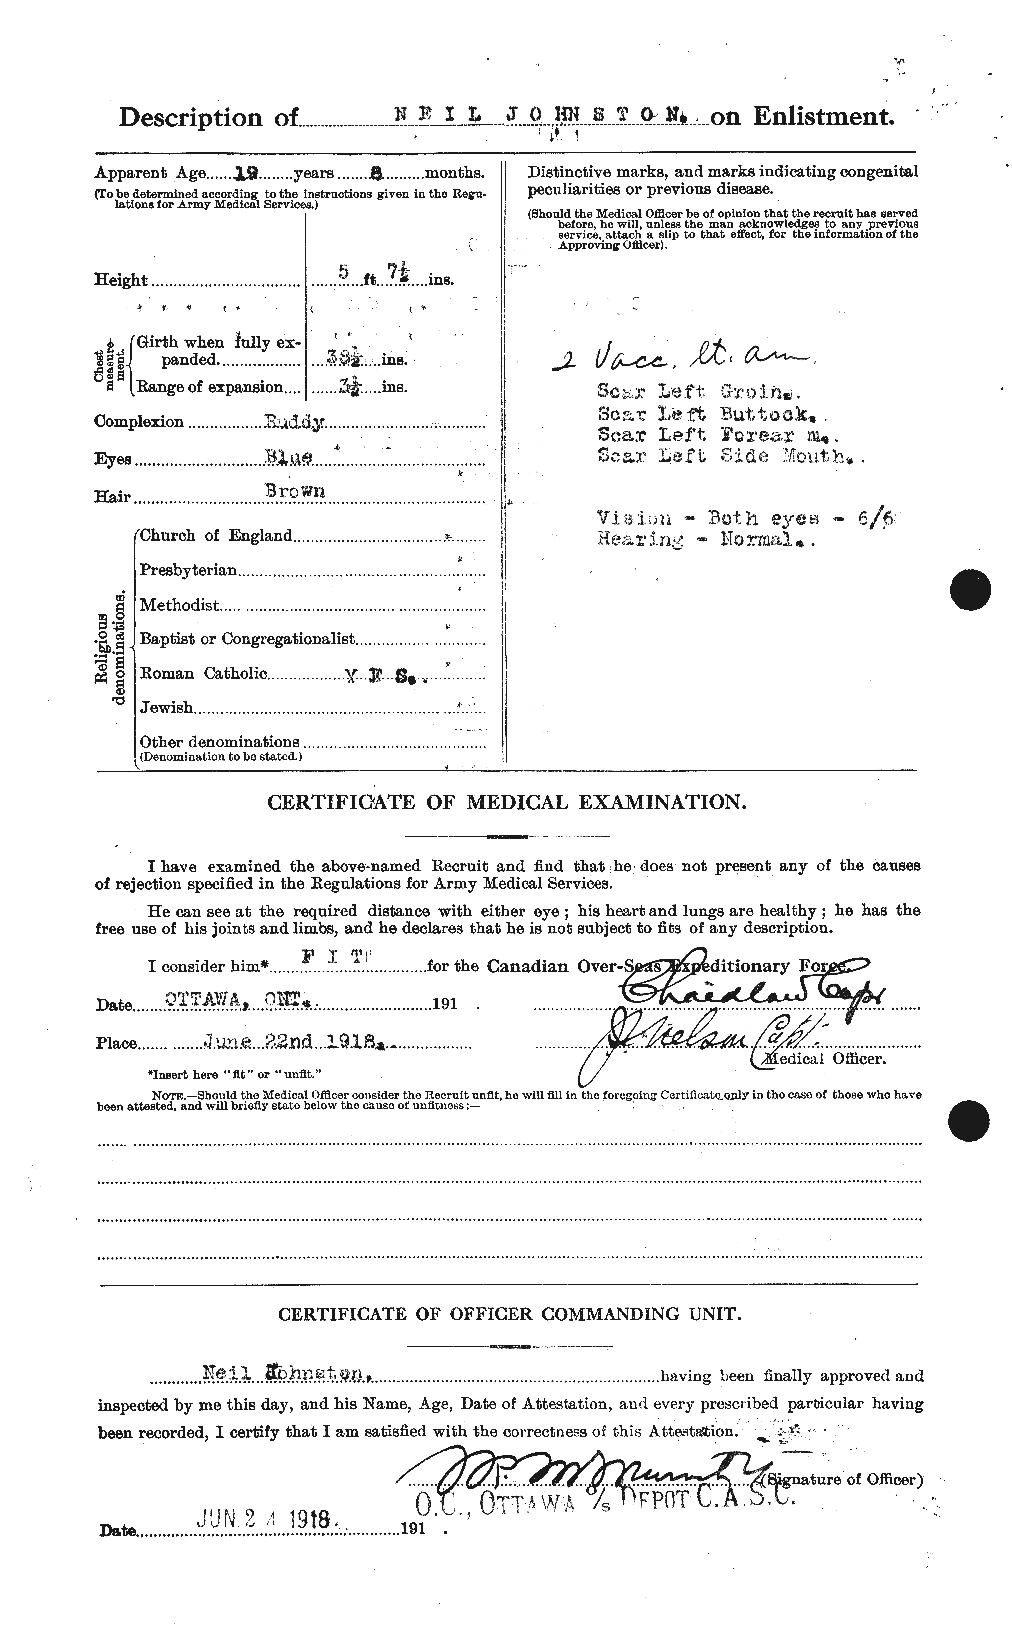 Personnel Records of the First World War - CEF 422998b